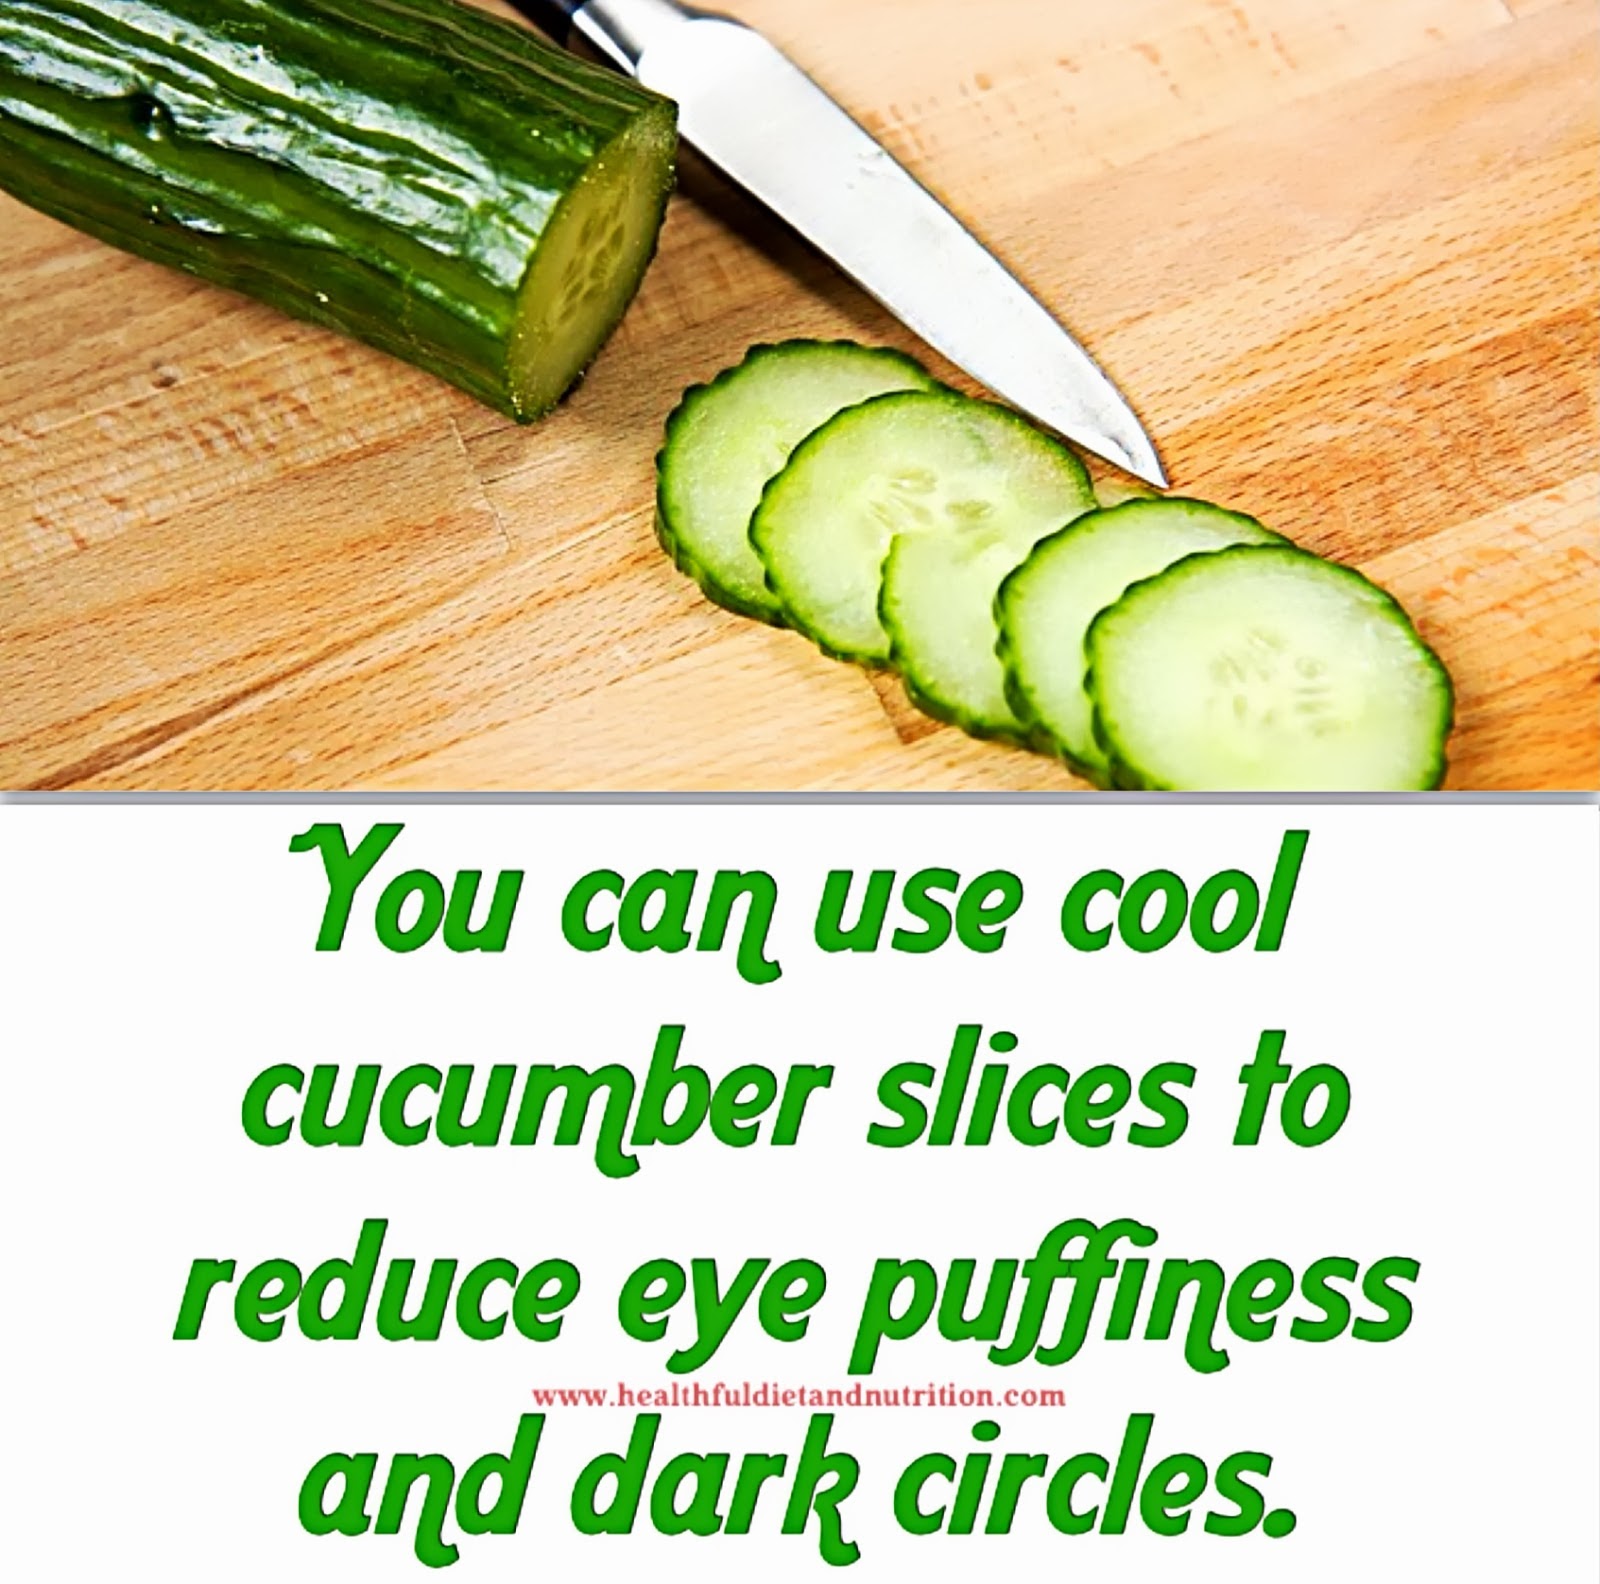 Use Cucumber Slices To Reduce Eye Puffiness